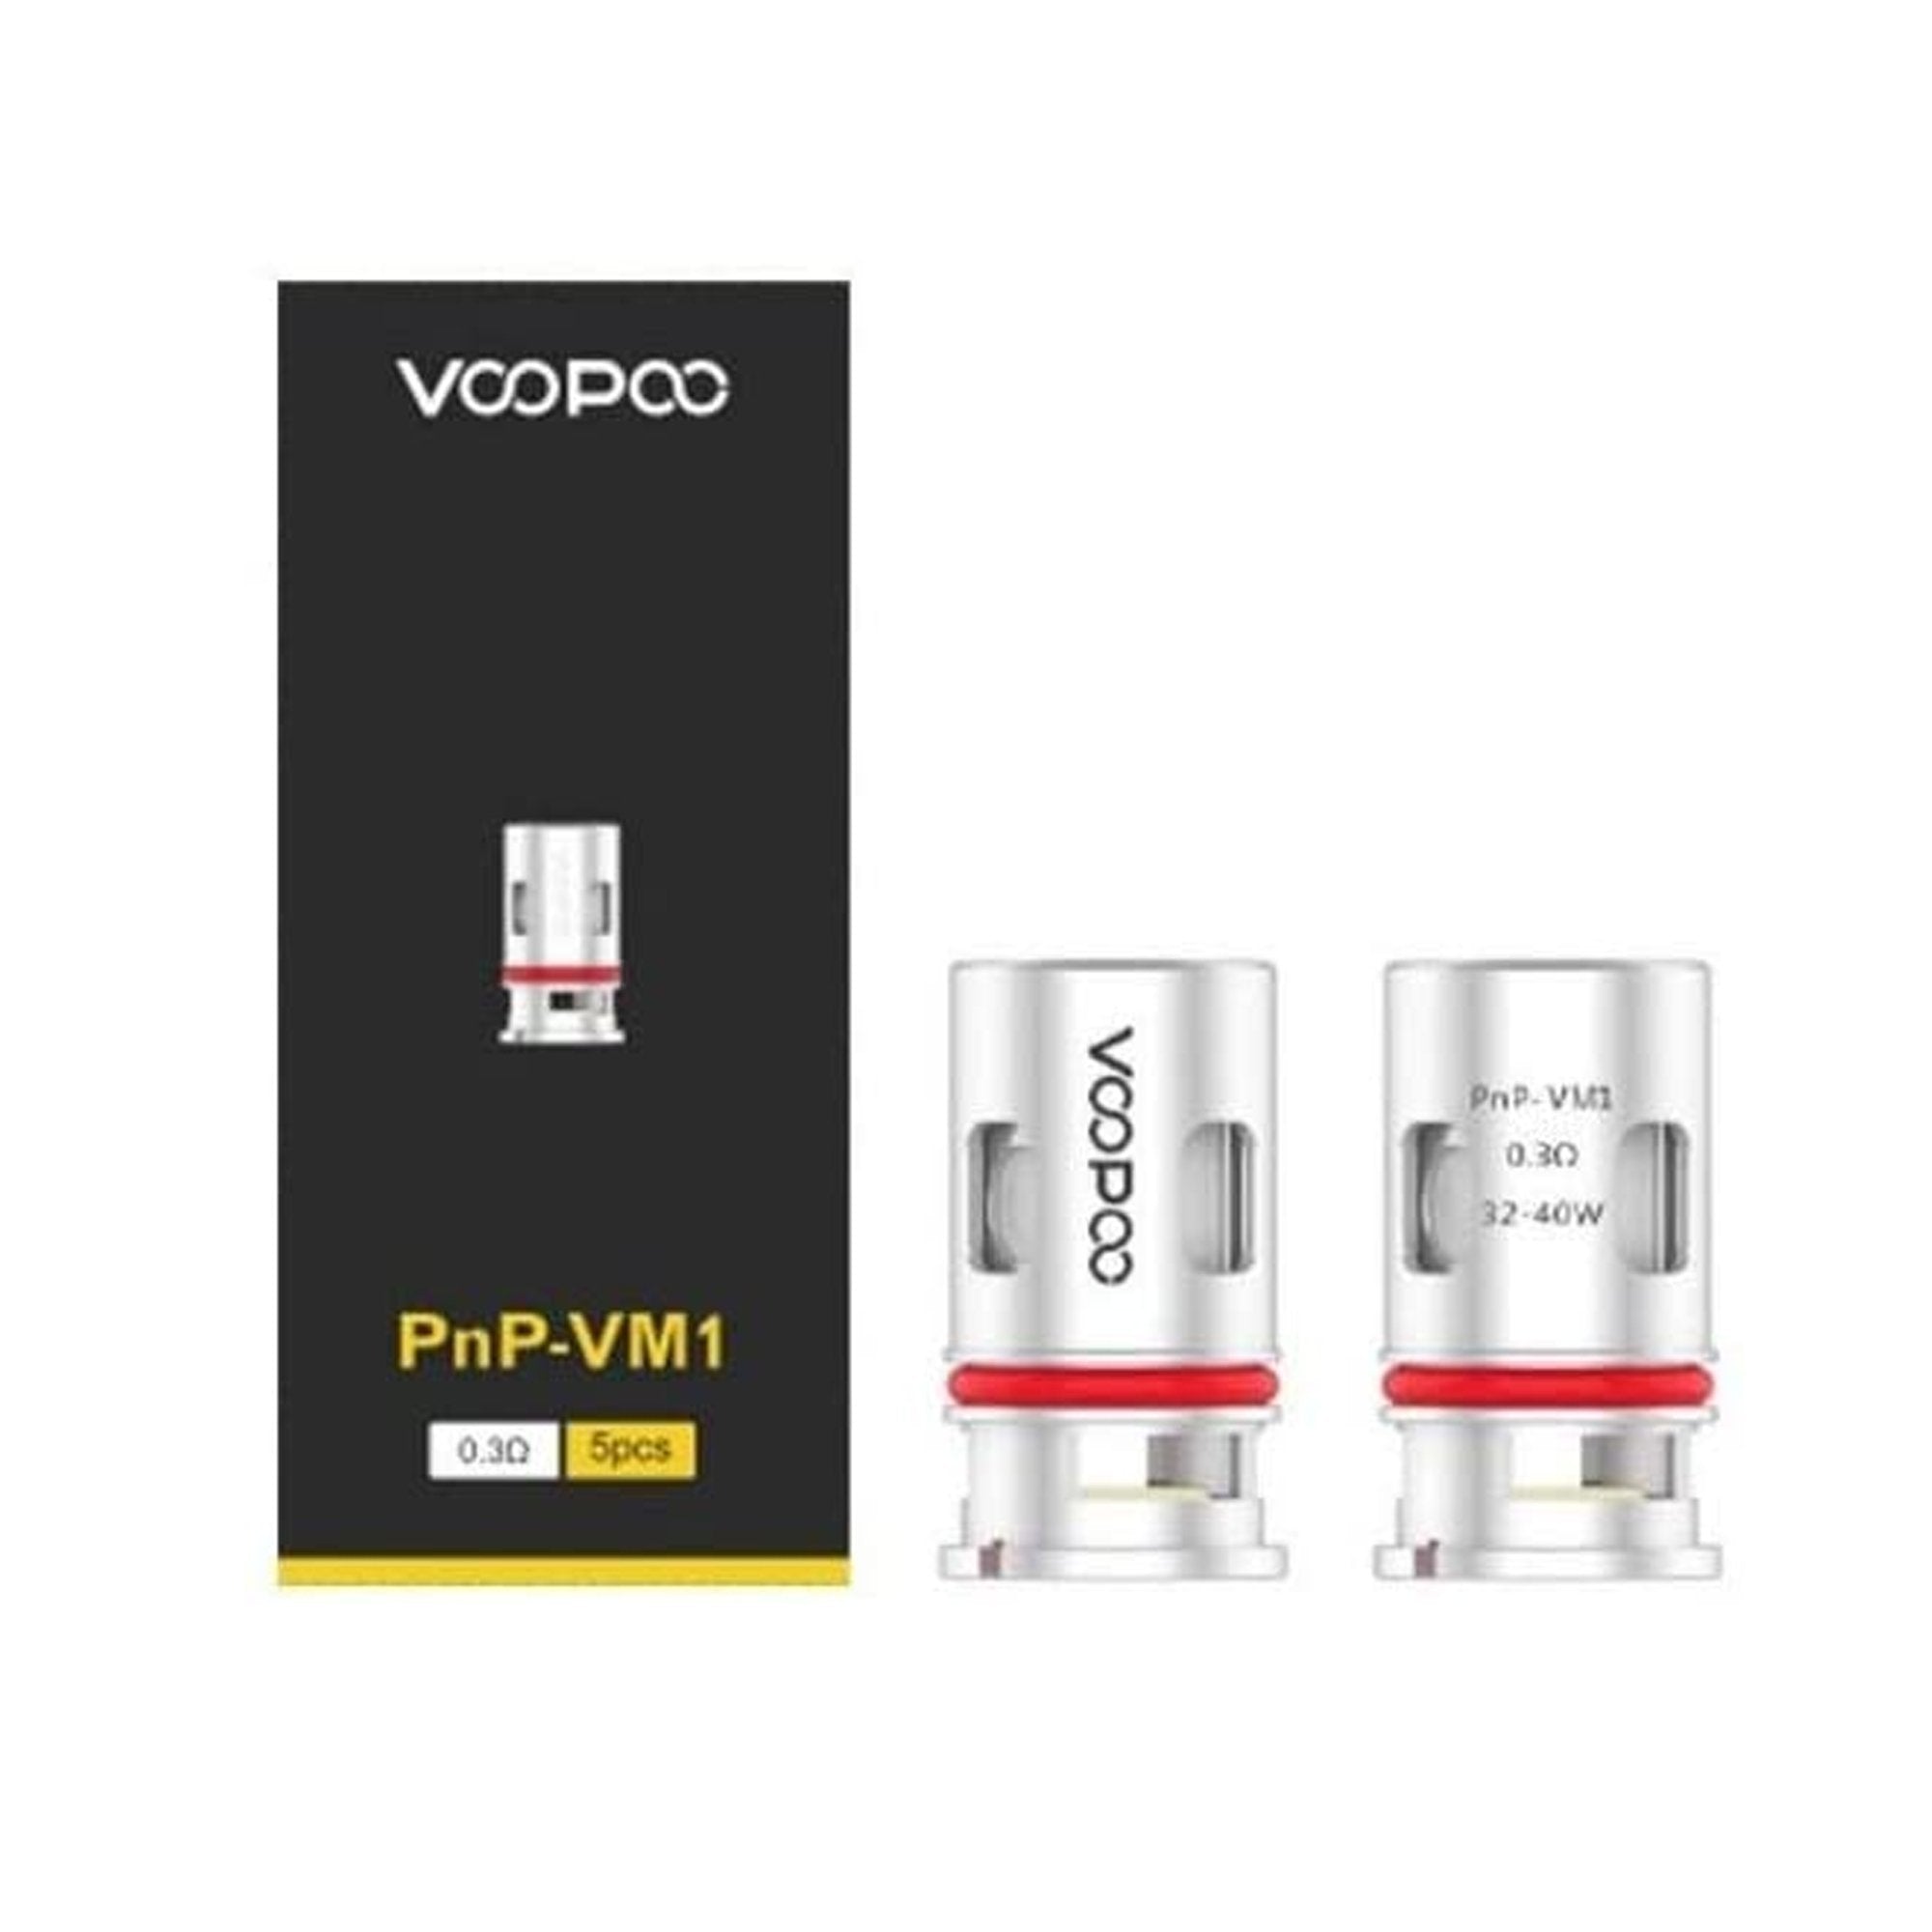 VooPoo PnP Mesh Replacement Coils | 5 Pack | Wolfvapes - Wolfvapes.co.uk-VM-1 (0.3 OHM)